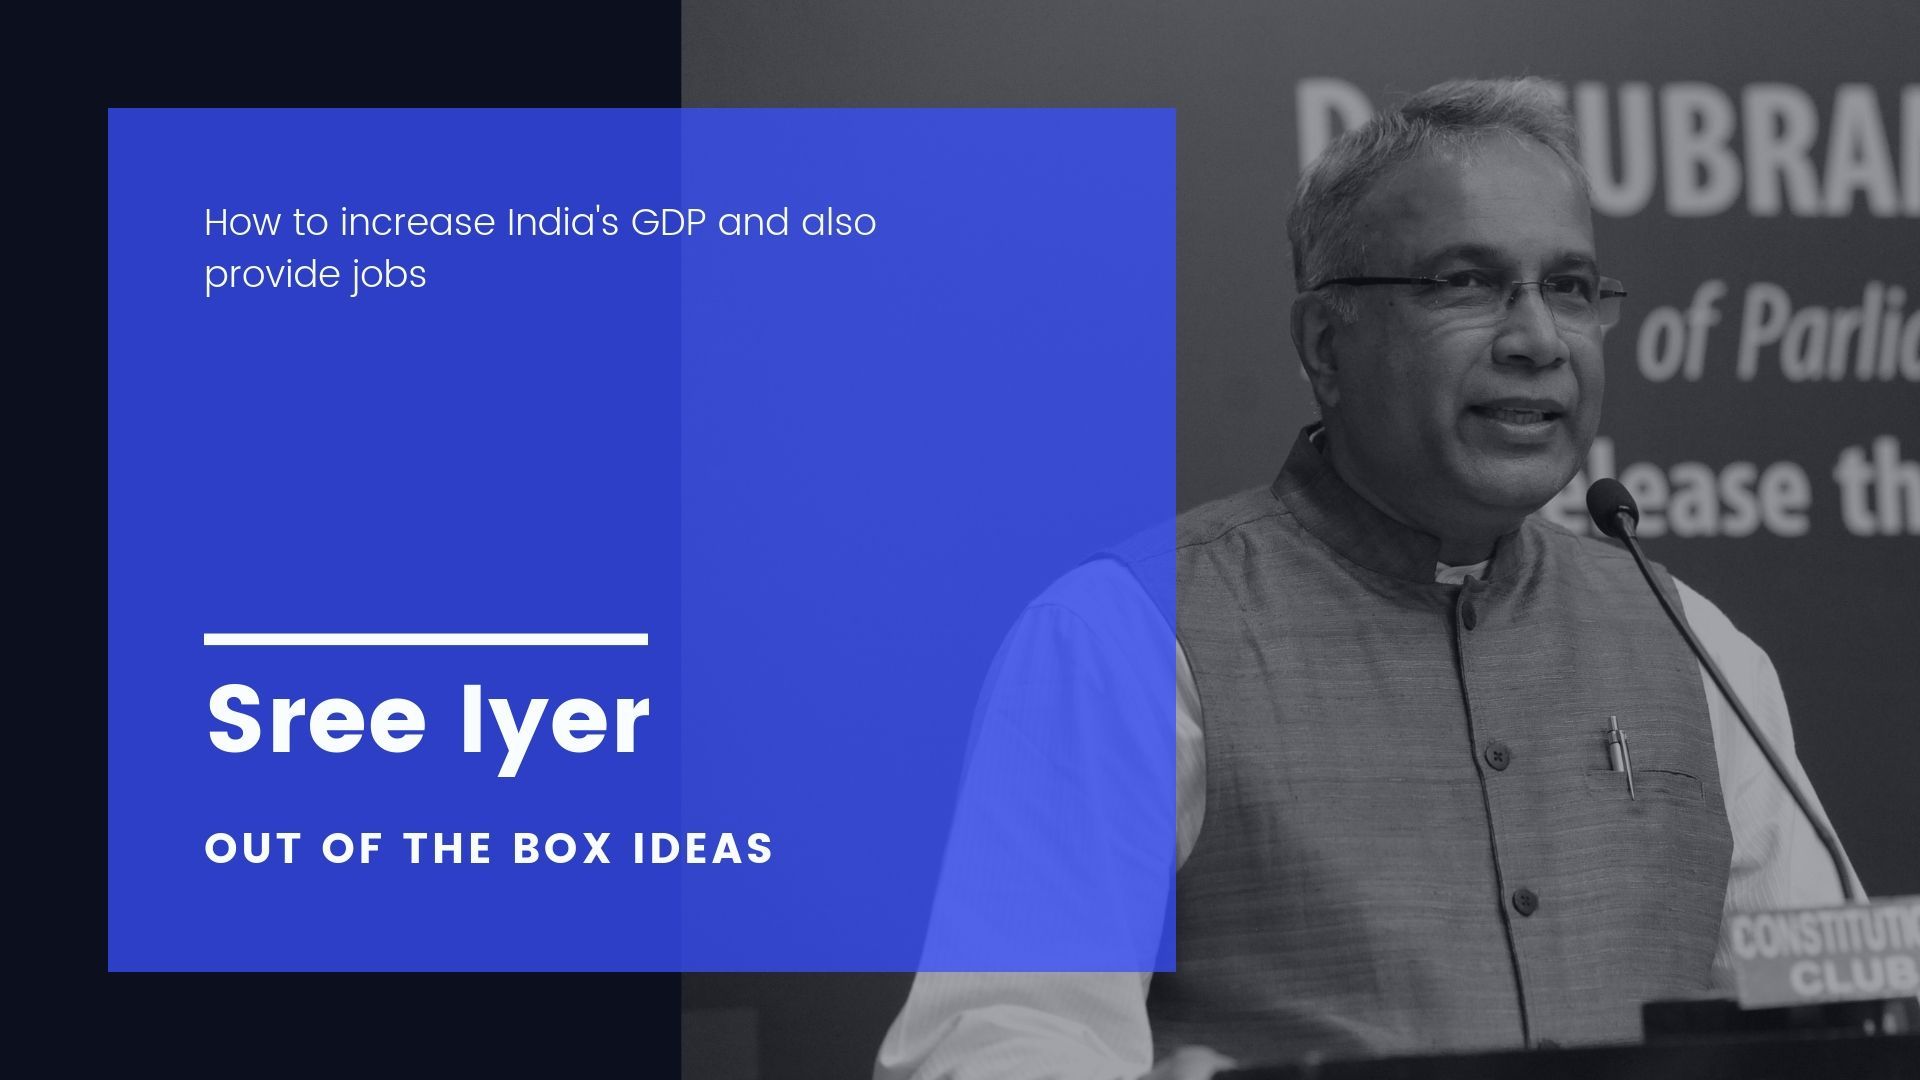 Sree Iyer gives his views on a TimesNow panel debate followed by a detailed explanation on how the Government can fix this